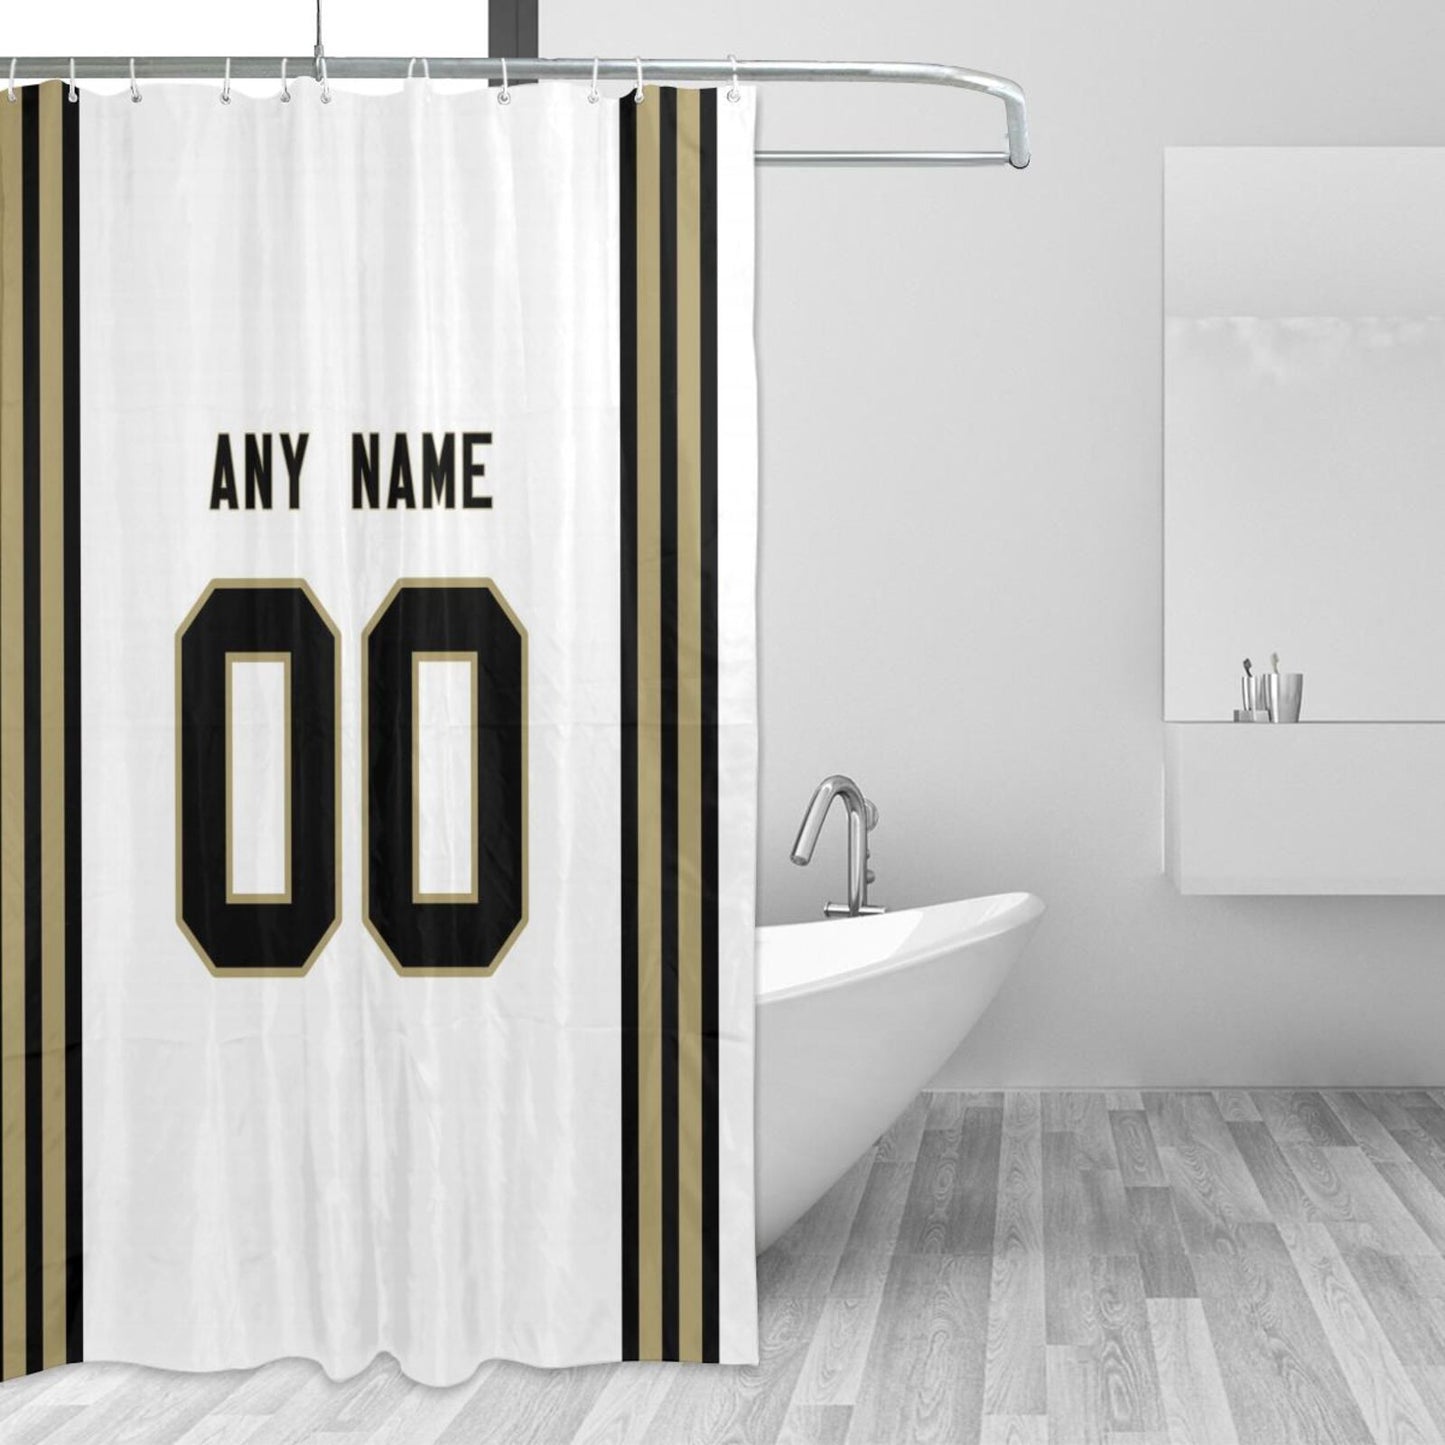 Custom Football New Orleans Saints style personalized shower curtain custom design name and number set of 12 shower curtain hooks Rings